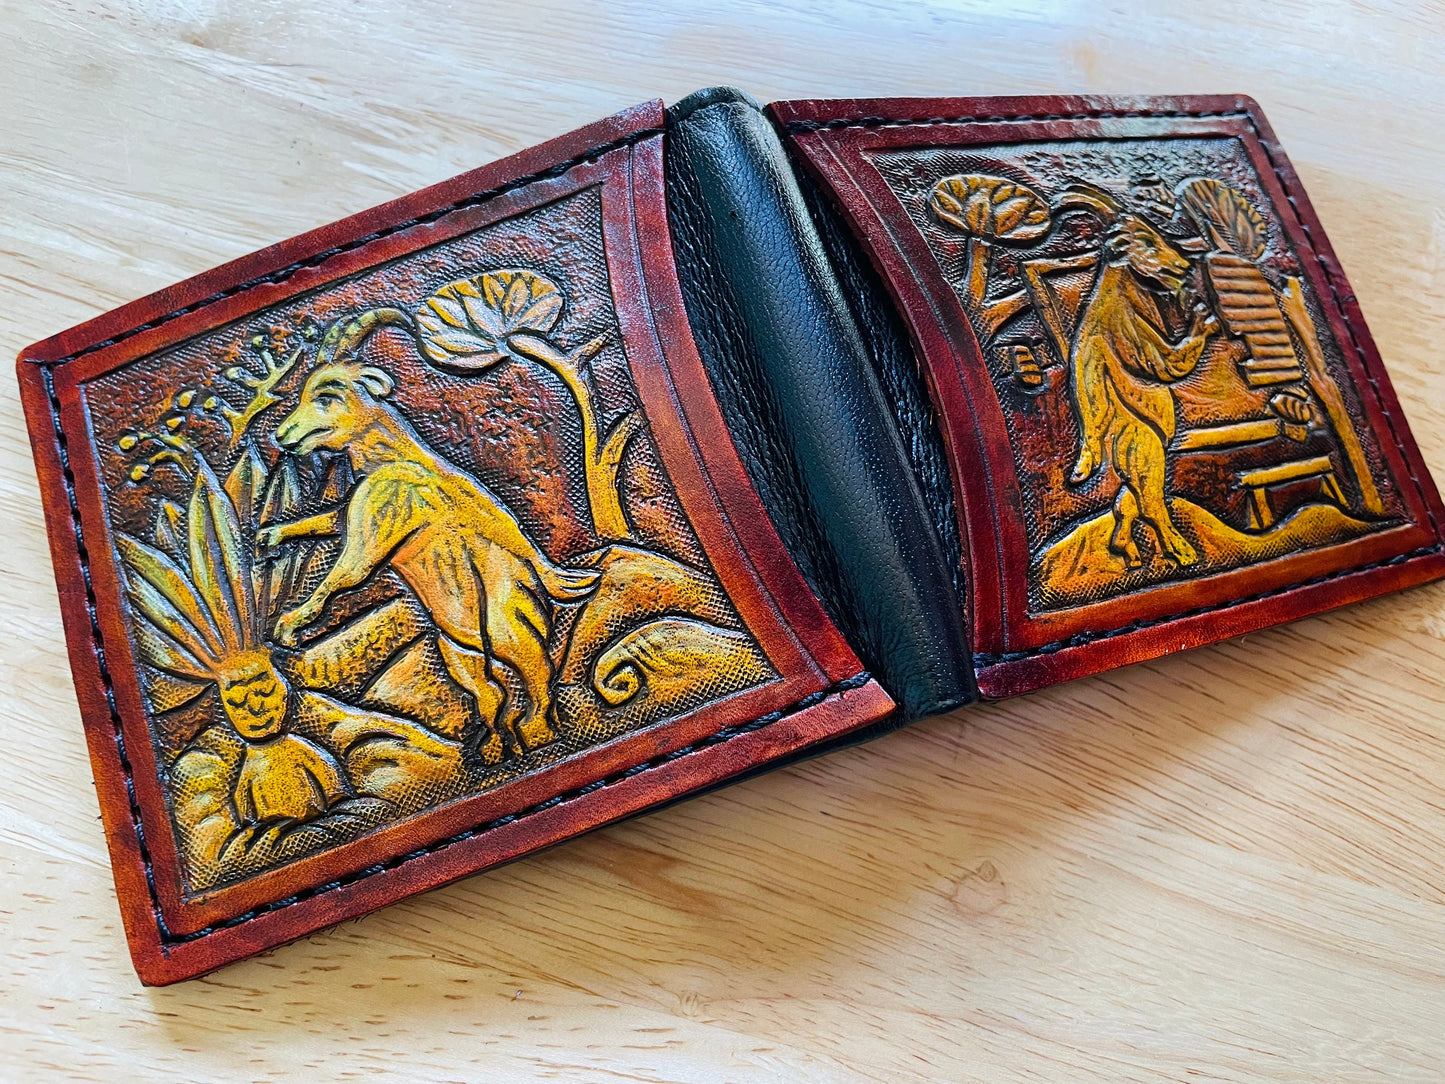 Marginalia medieval Goats - bee keepers - leather wallet- Dark Brown and ivory colour - Leather Bifold Wallet - Handcrafted